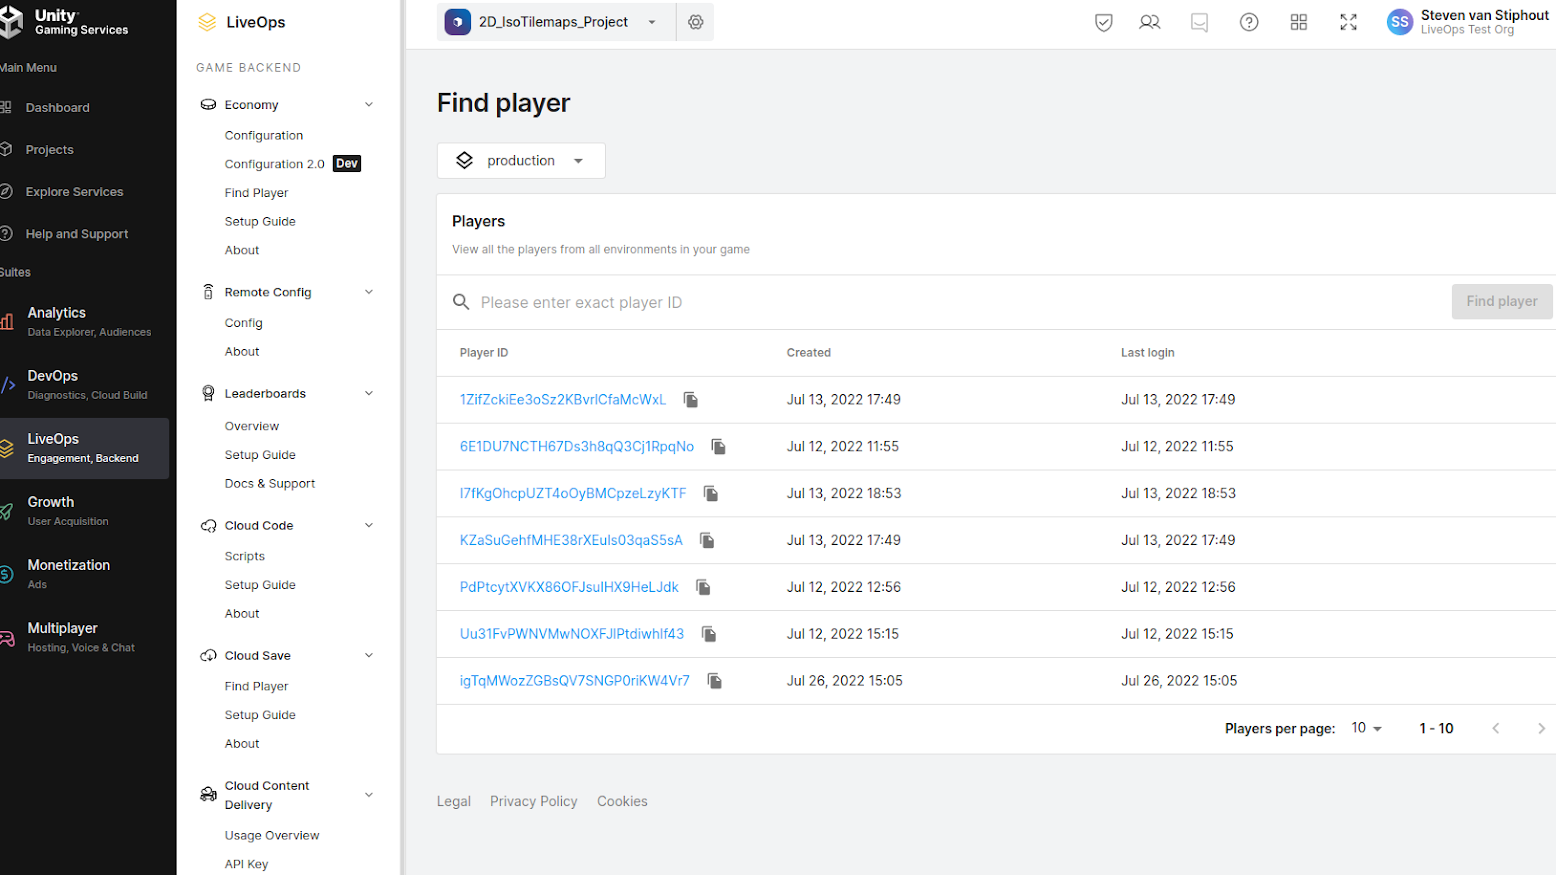 Backend player dashboard: "Find player" view